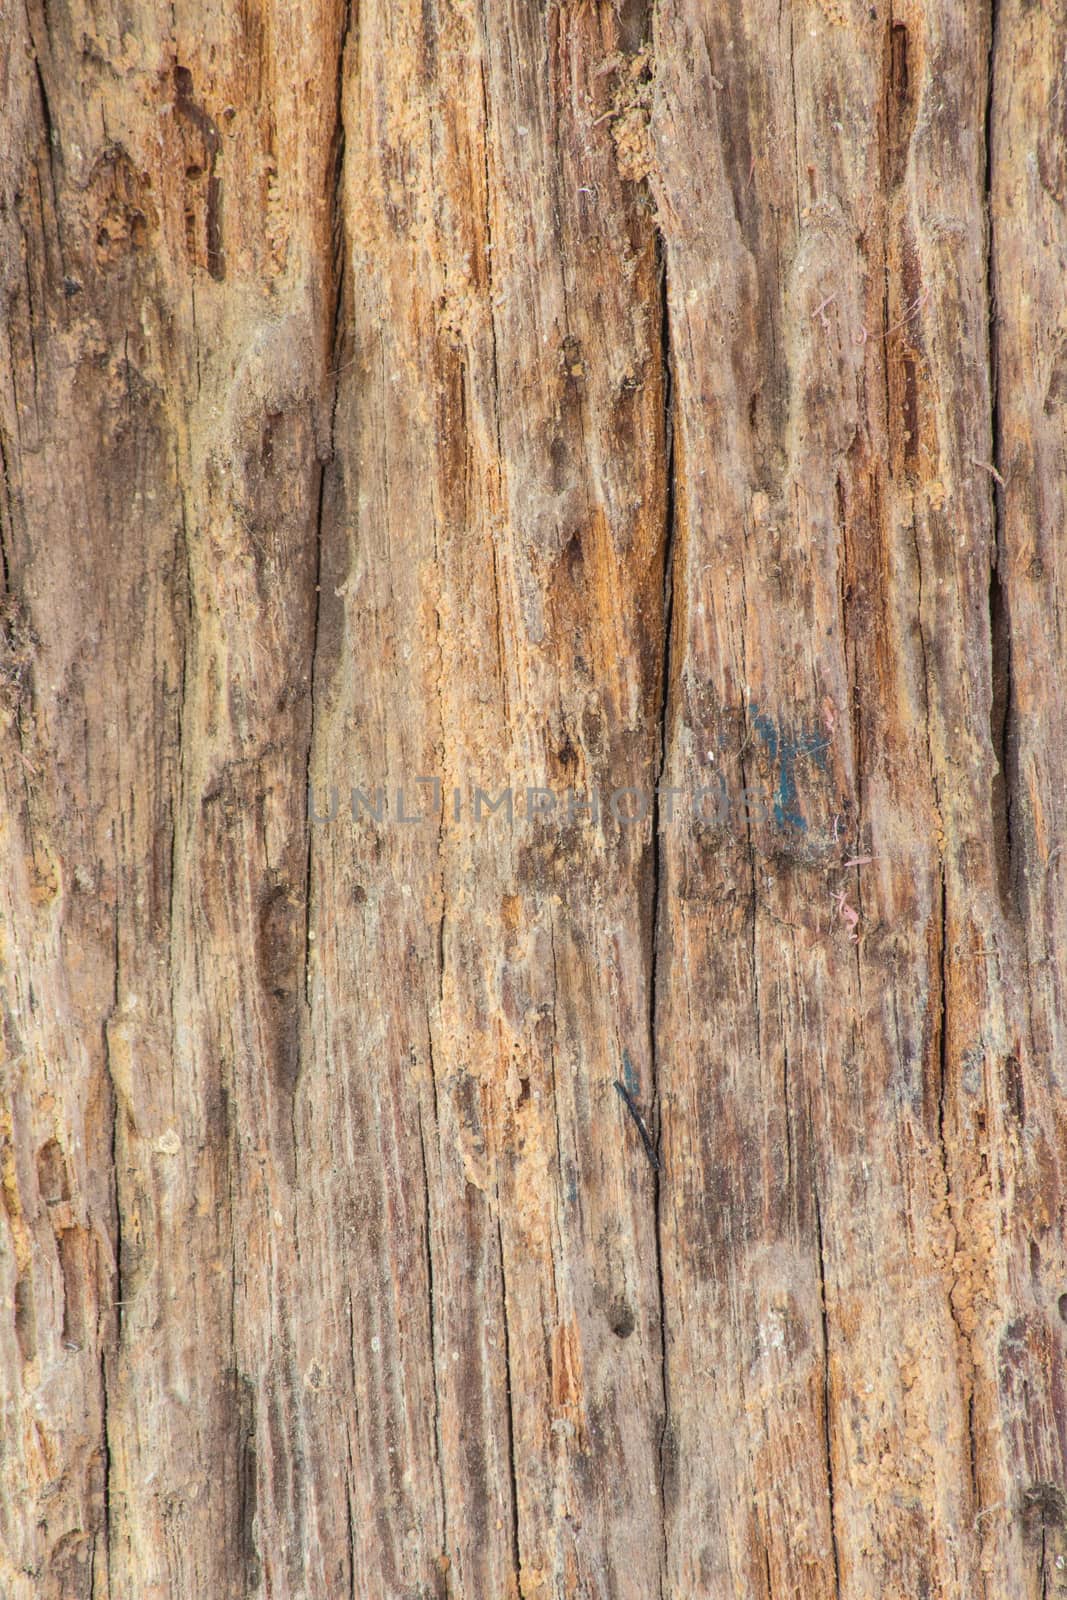 The Old wooden plank with termites damage